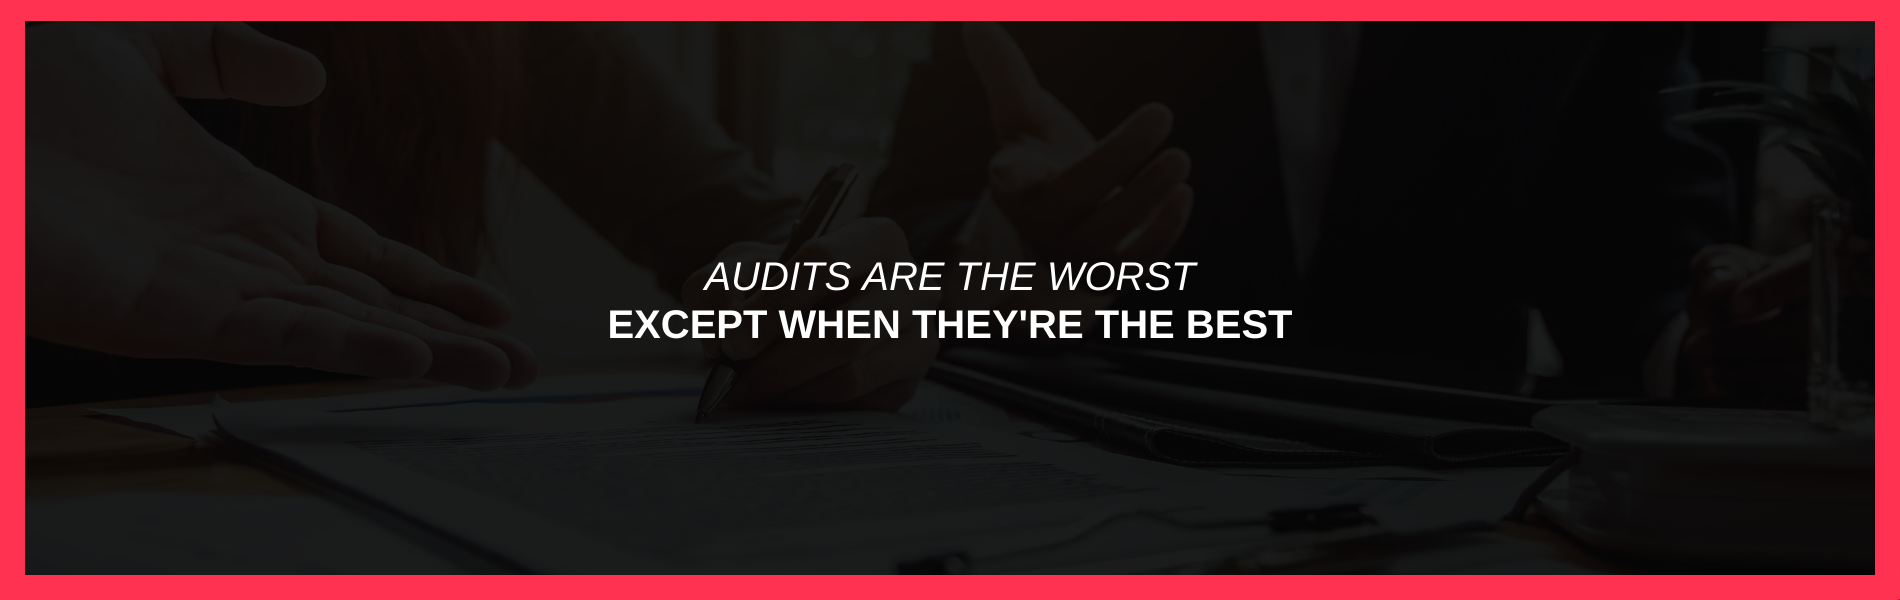 Audits are the Worst Except When They're the Best